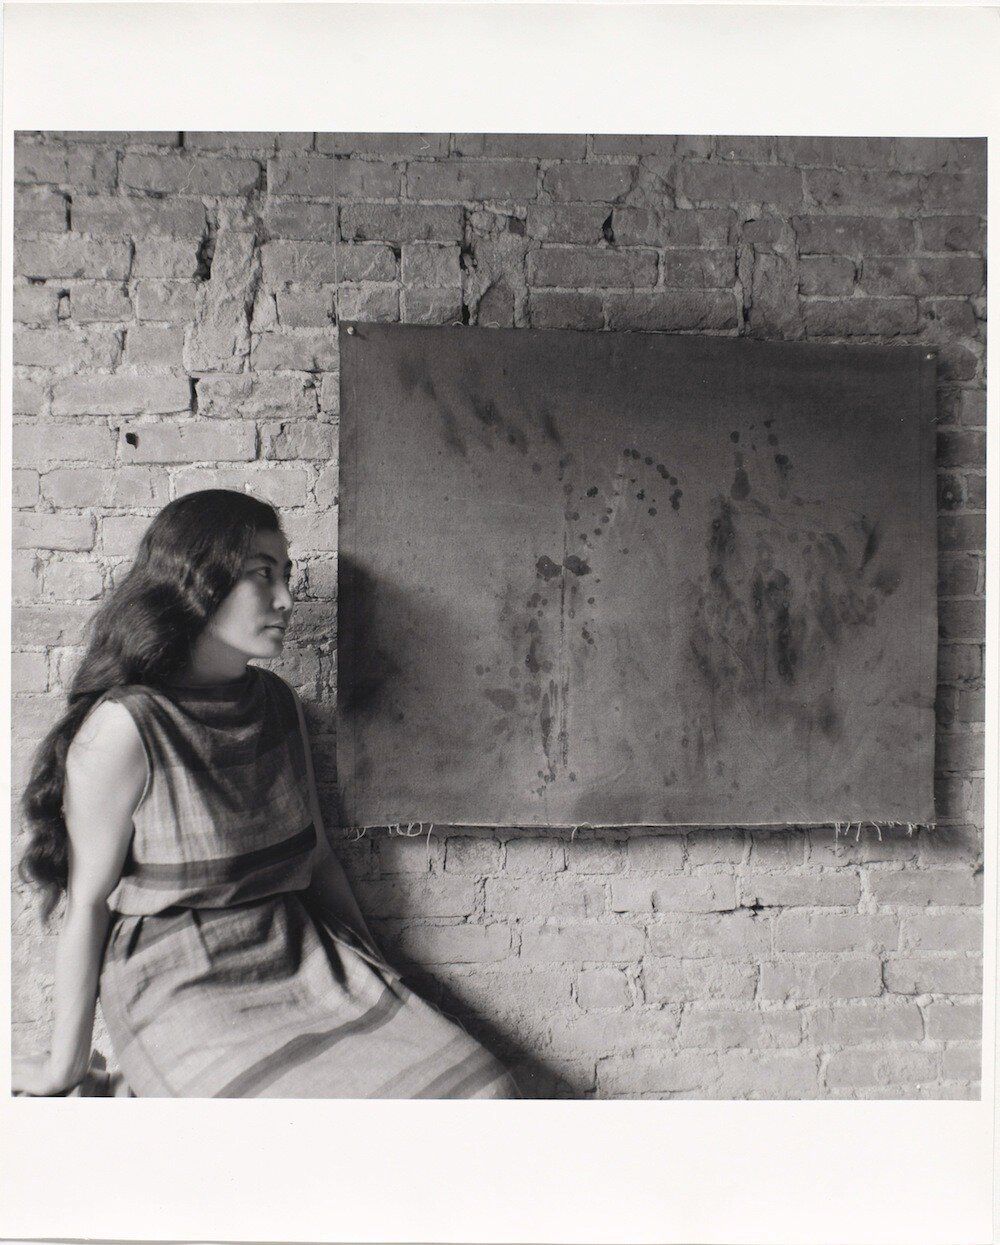 Painting to See in the Dark (Version 1). 1961. Installation view with the artist, Paintings & Drawings by Yoko Ono, AG Gallery, New York, July 17–30, 1961. Photograph by George Maciunas.